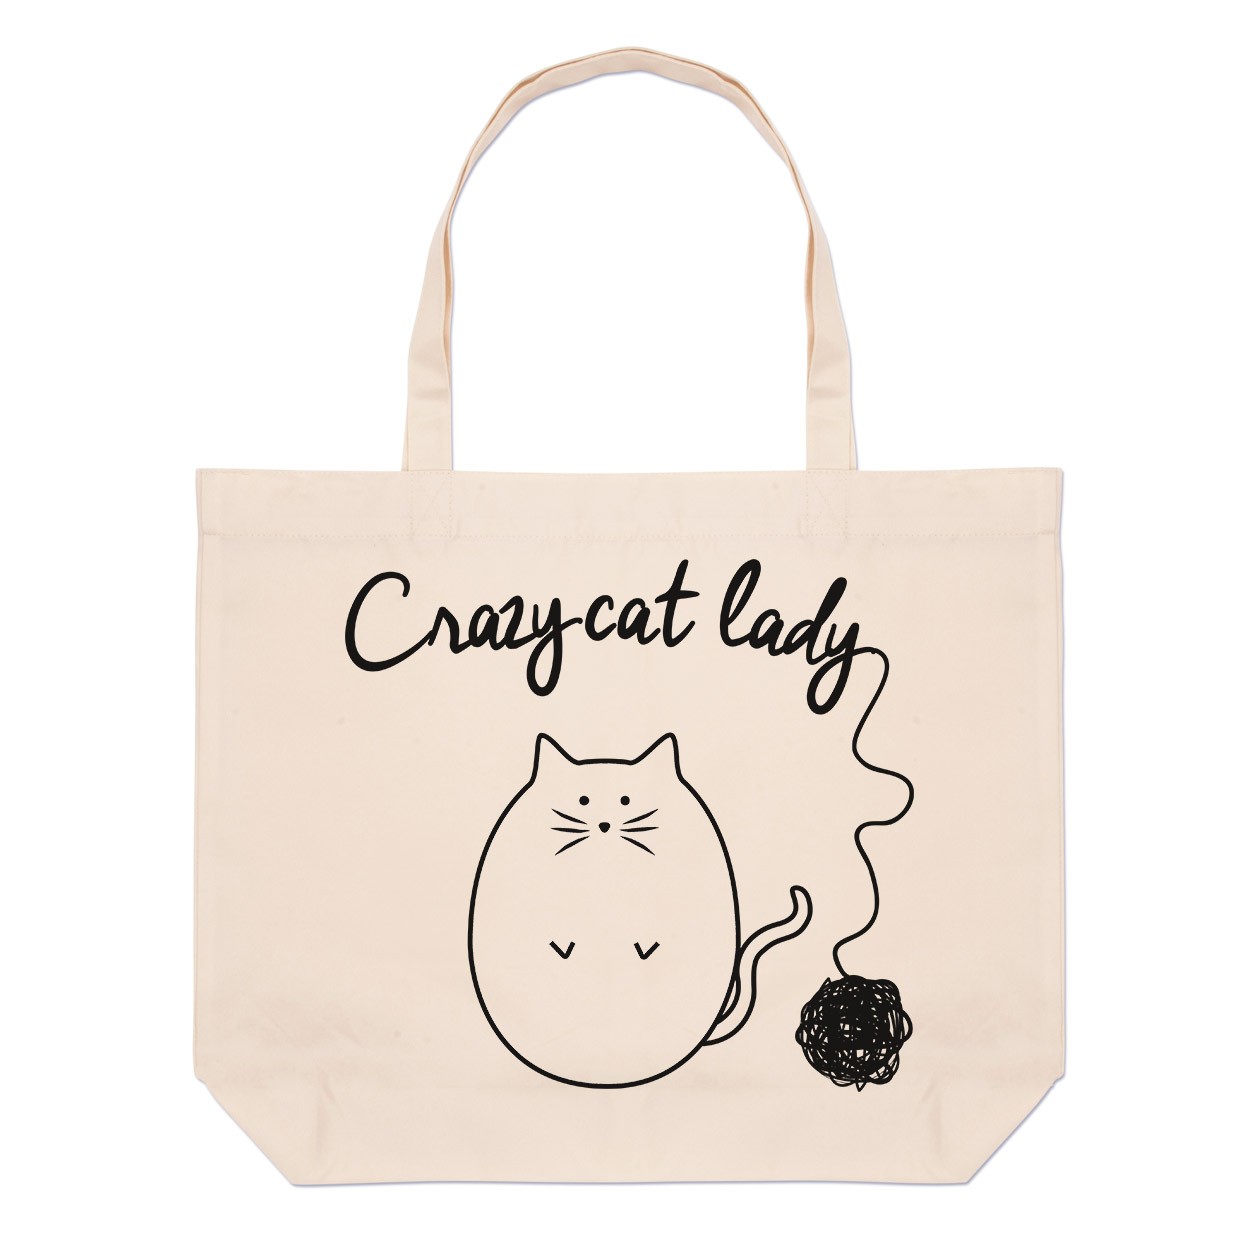 Ball Of Yarn Crazy Cat Lady Large Beach Tote Bag